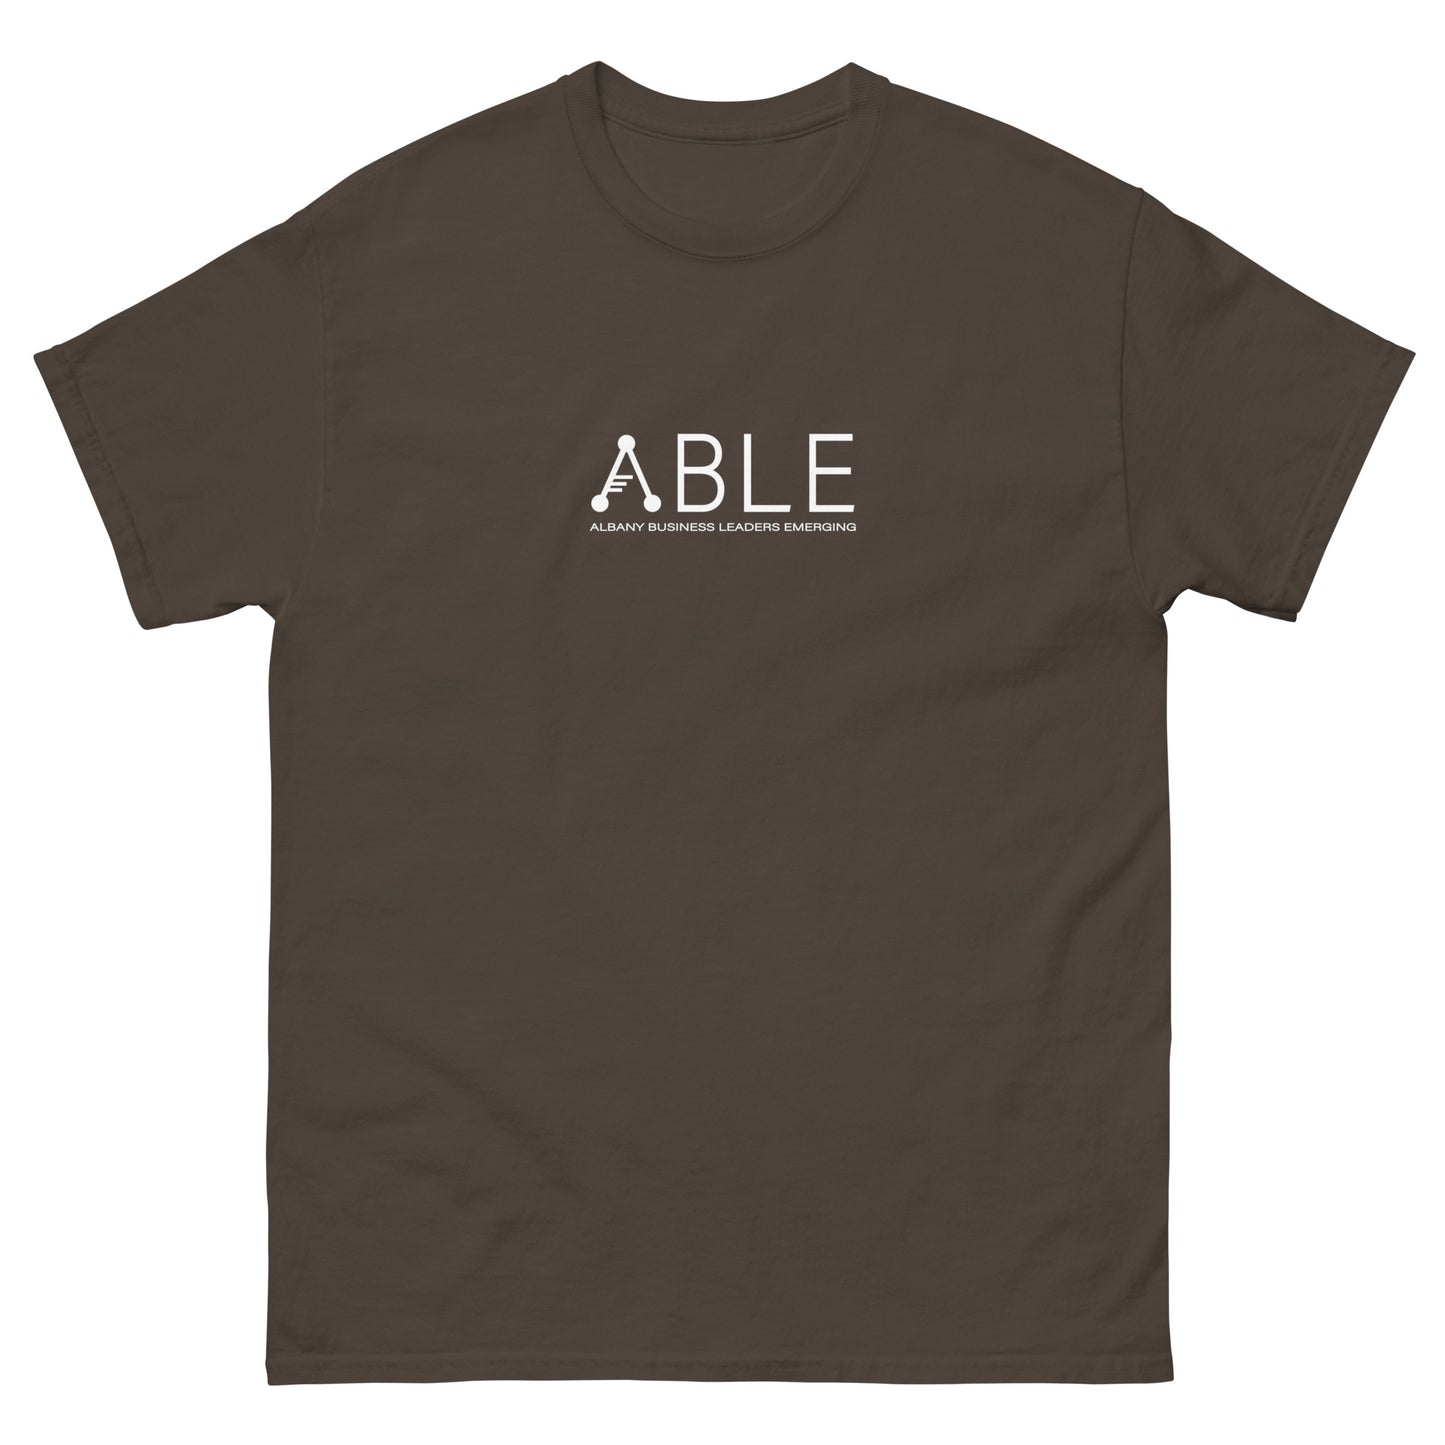 ABLE's Classic Tee